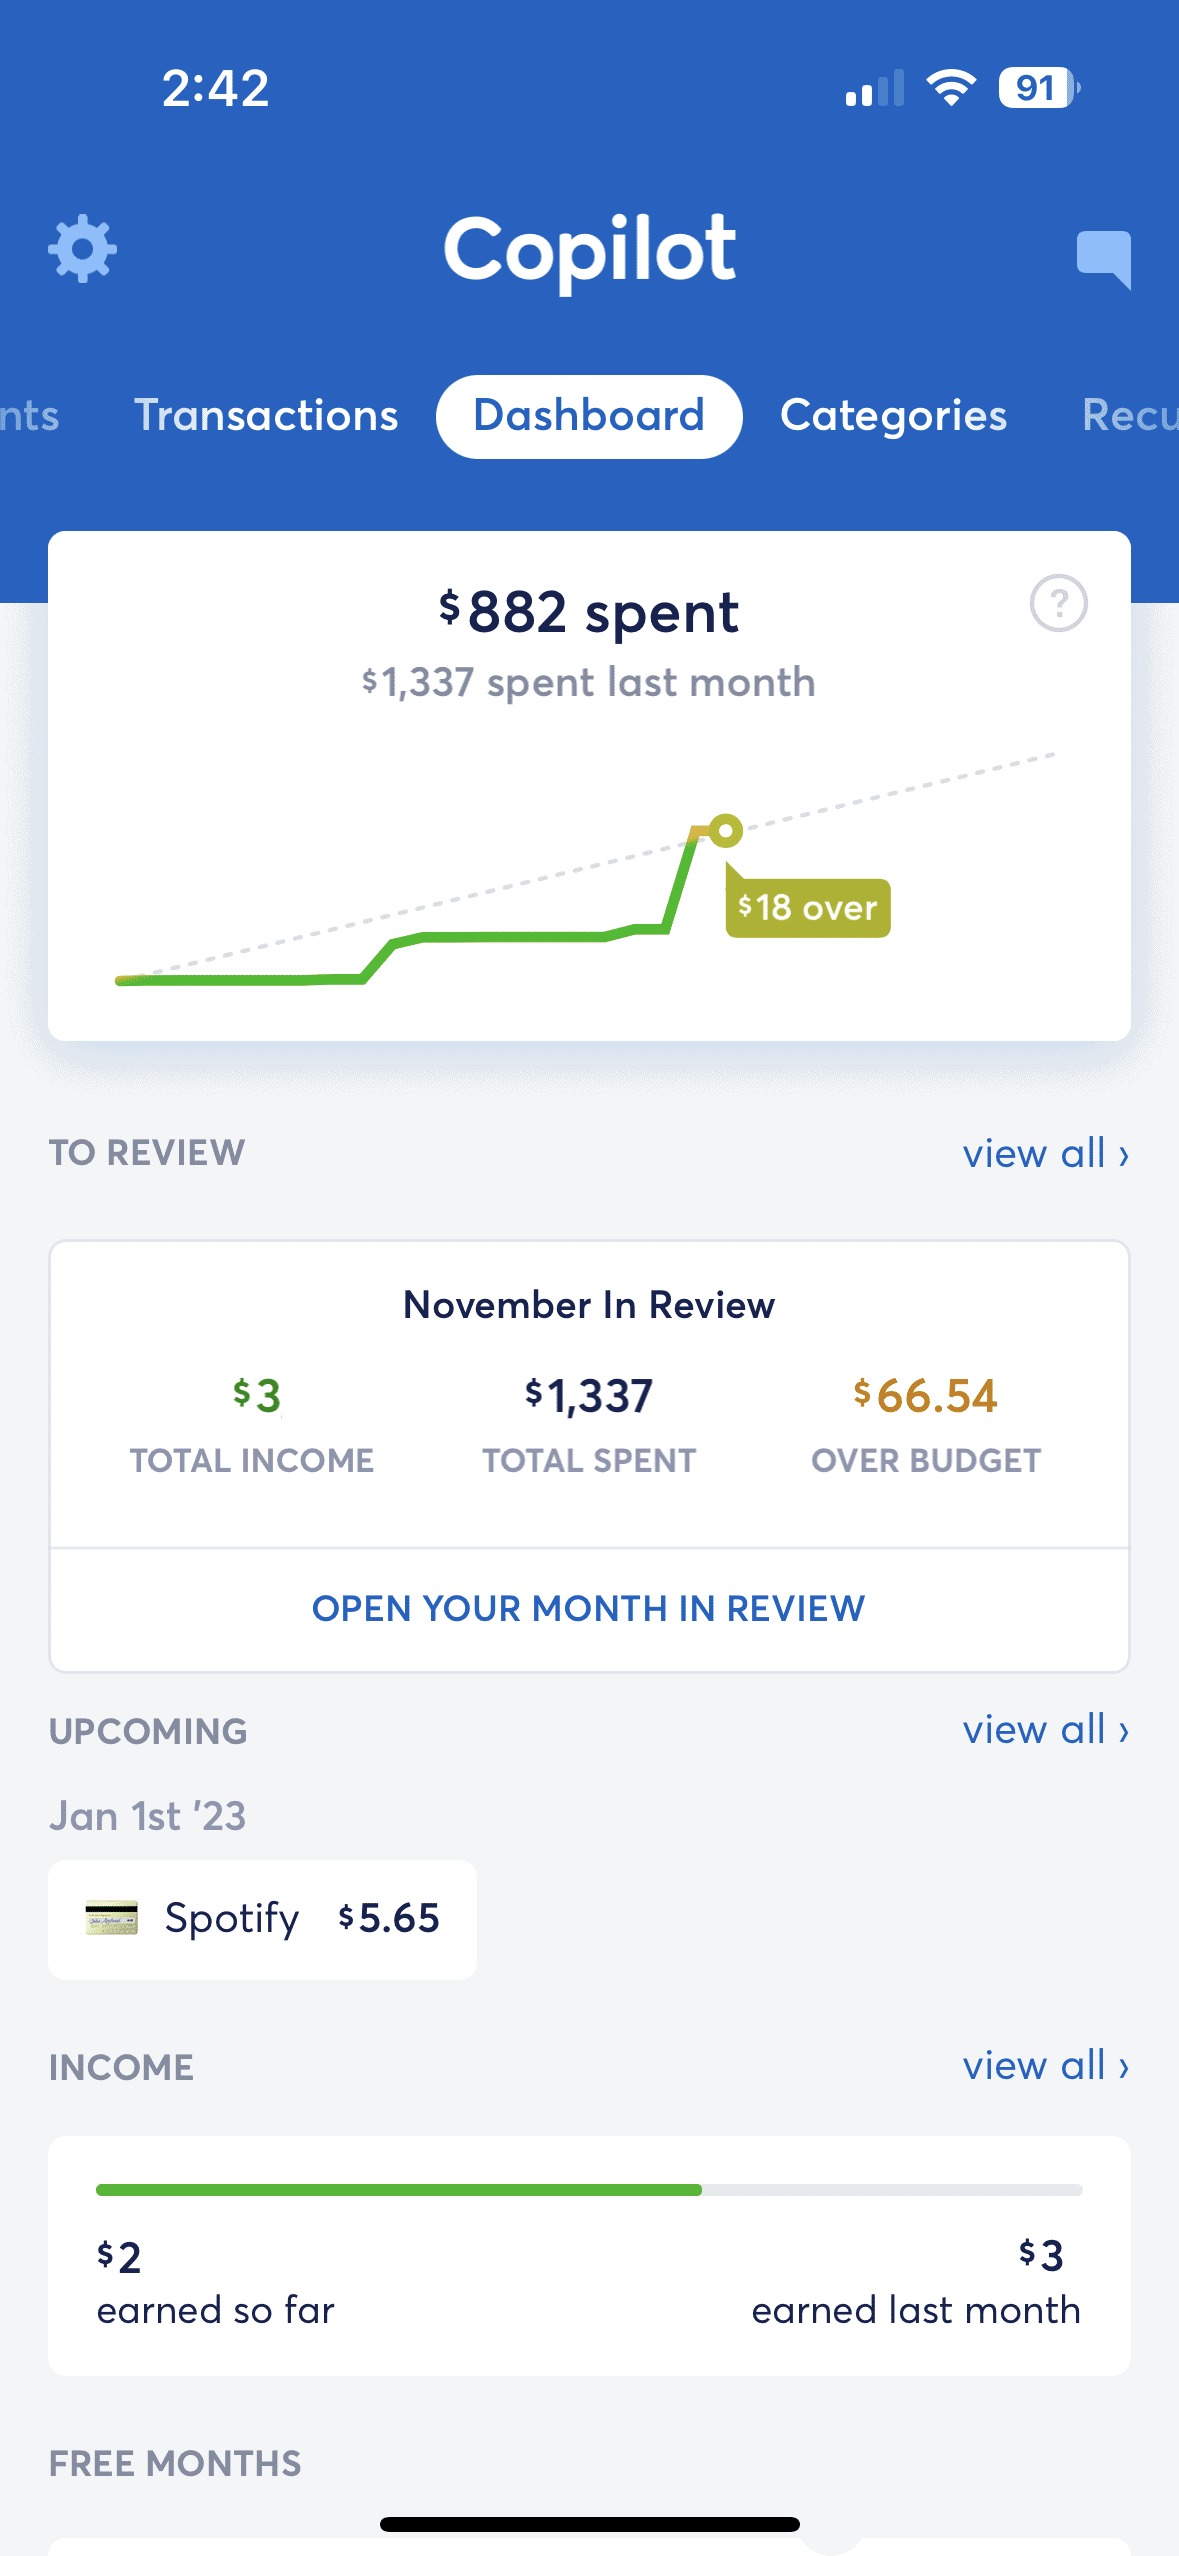 copilot dashboard screen on mobile, showing month review and graphs